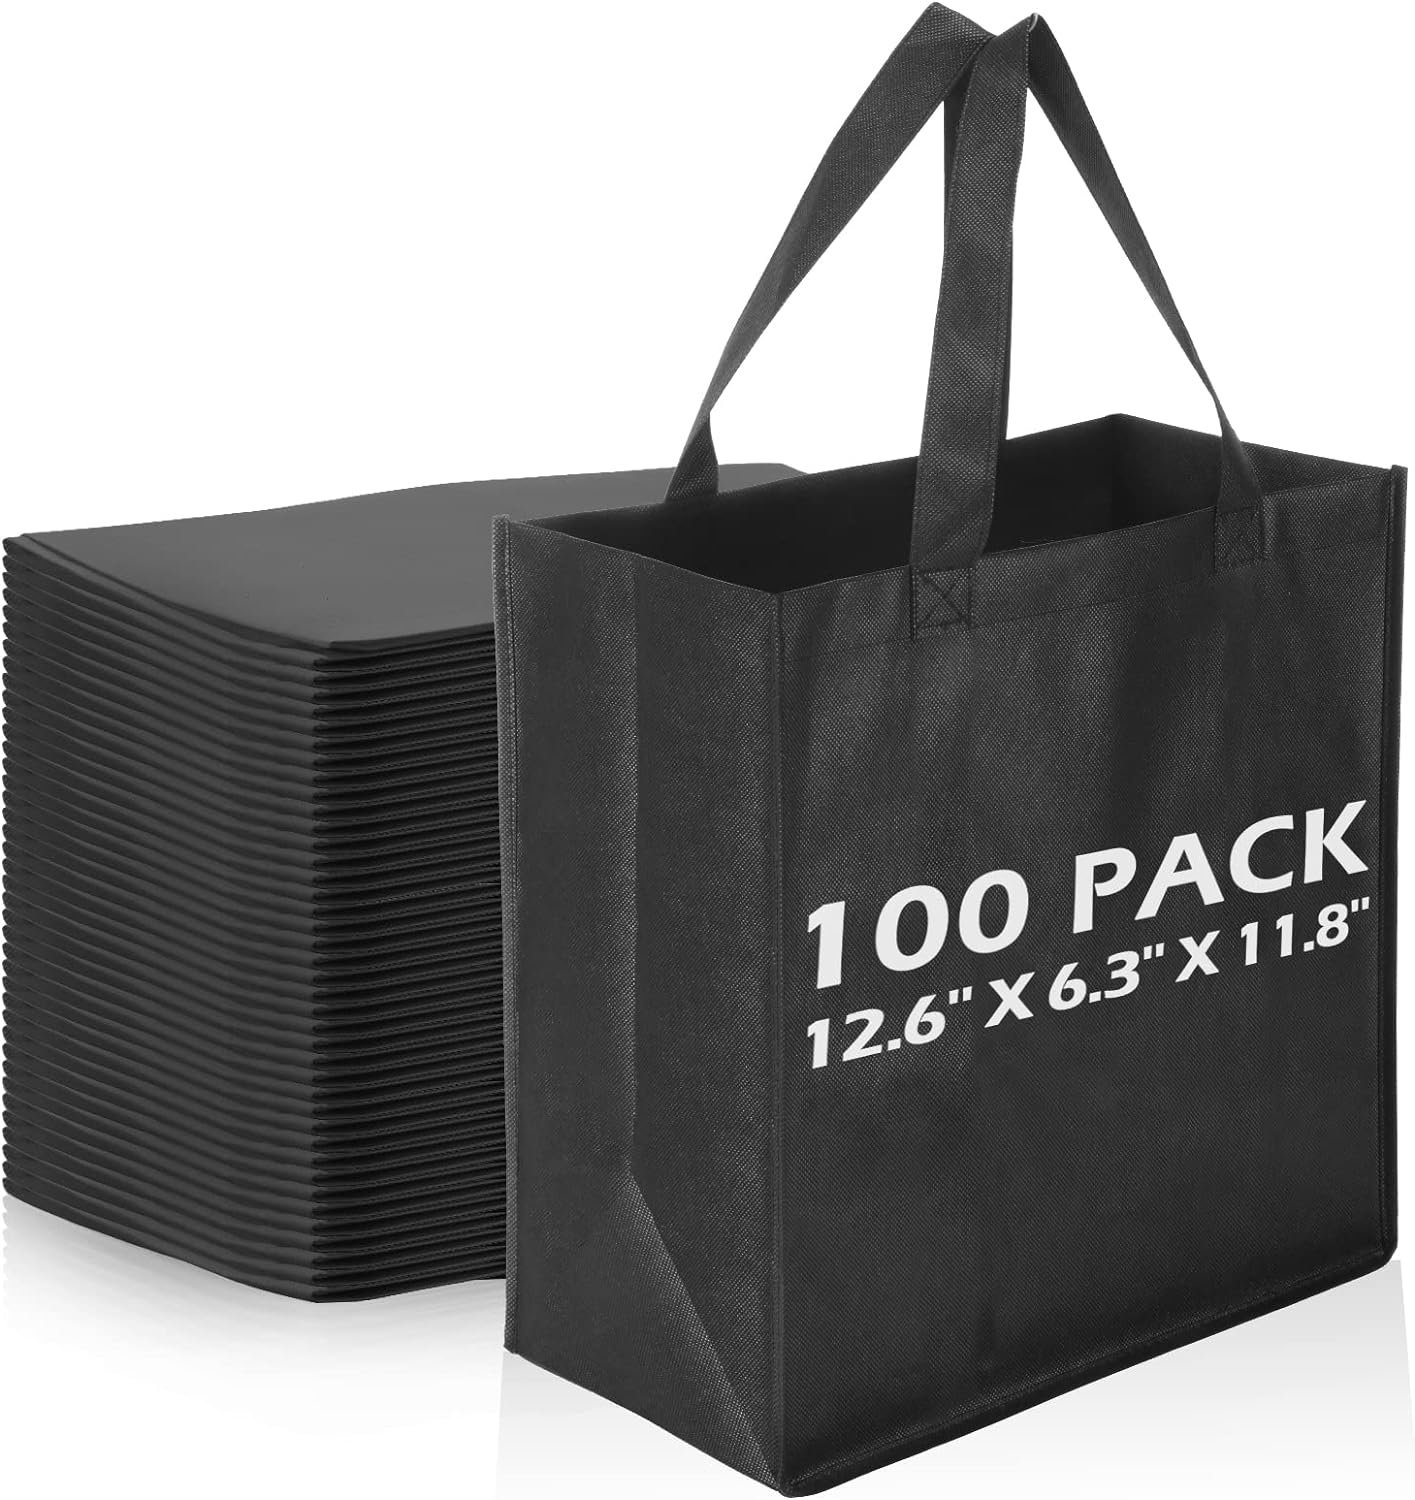 100 Pieces Reusable Totes Bag Set Non Woven Grocery Bag with Handles Fabric Portable Tote Bag Bulk for Shopping Merchandise Events Parties Boutiques Retail Stores (Black)